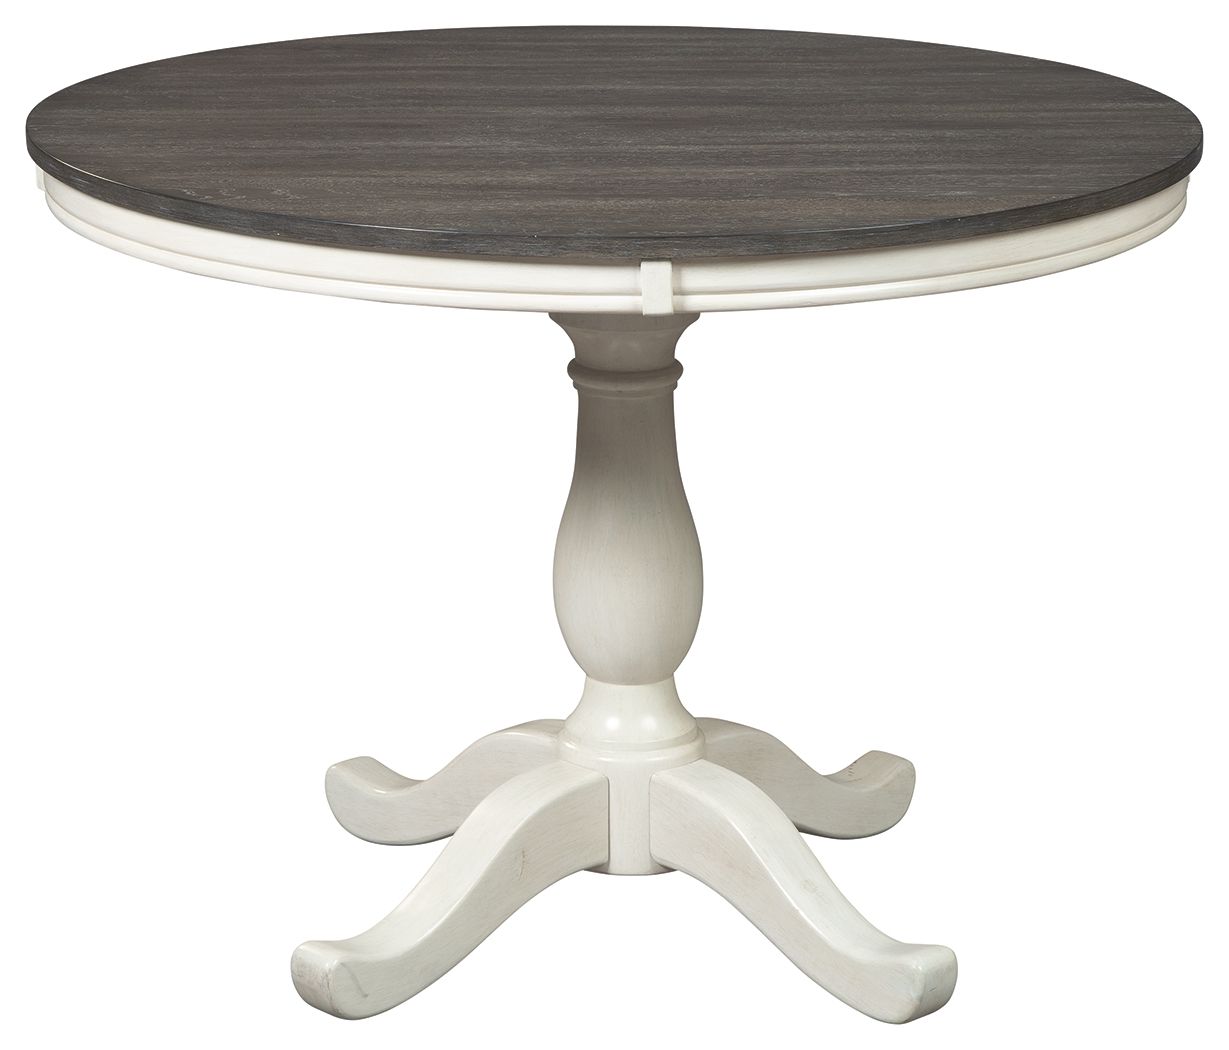 Nelling - White / Brown / Beige- Dining Room Table - Tony's Home Furnishings